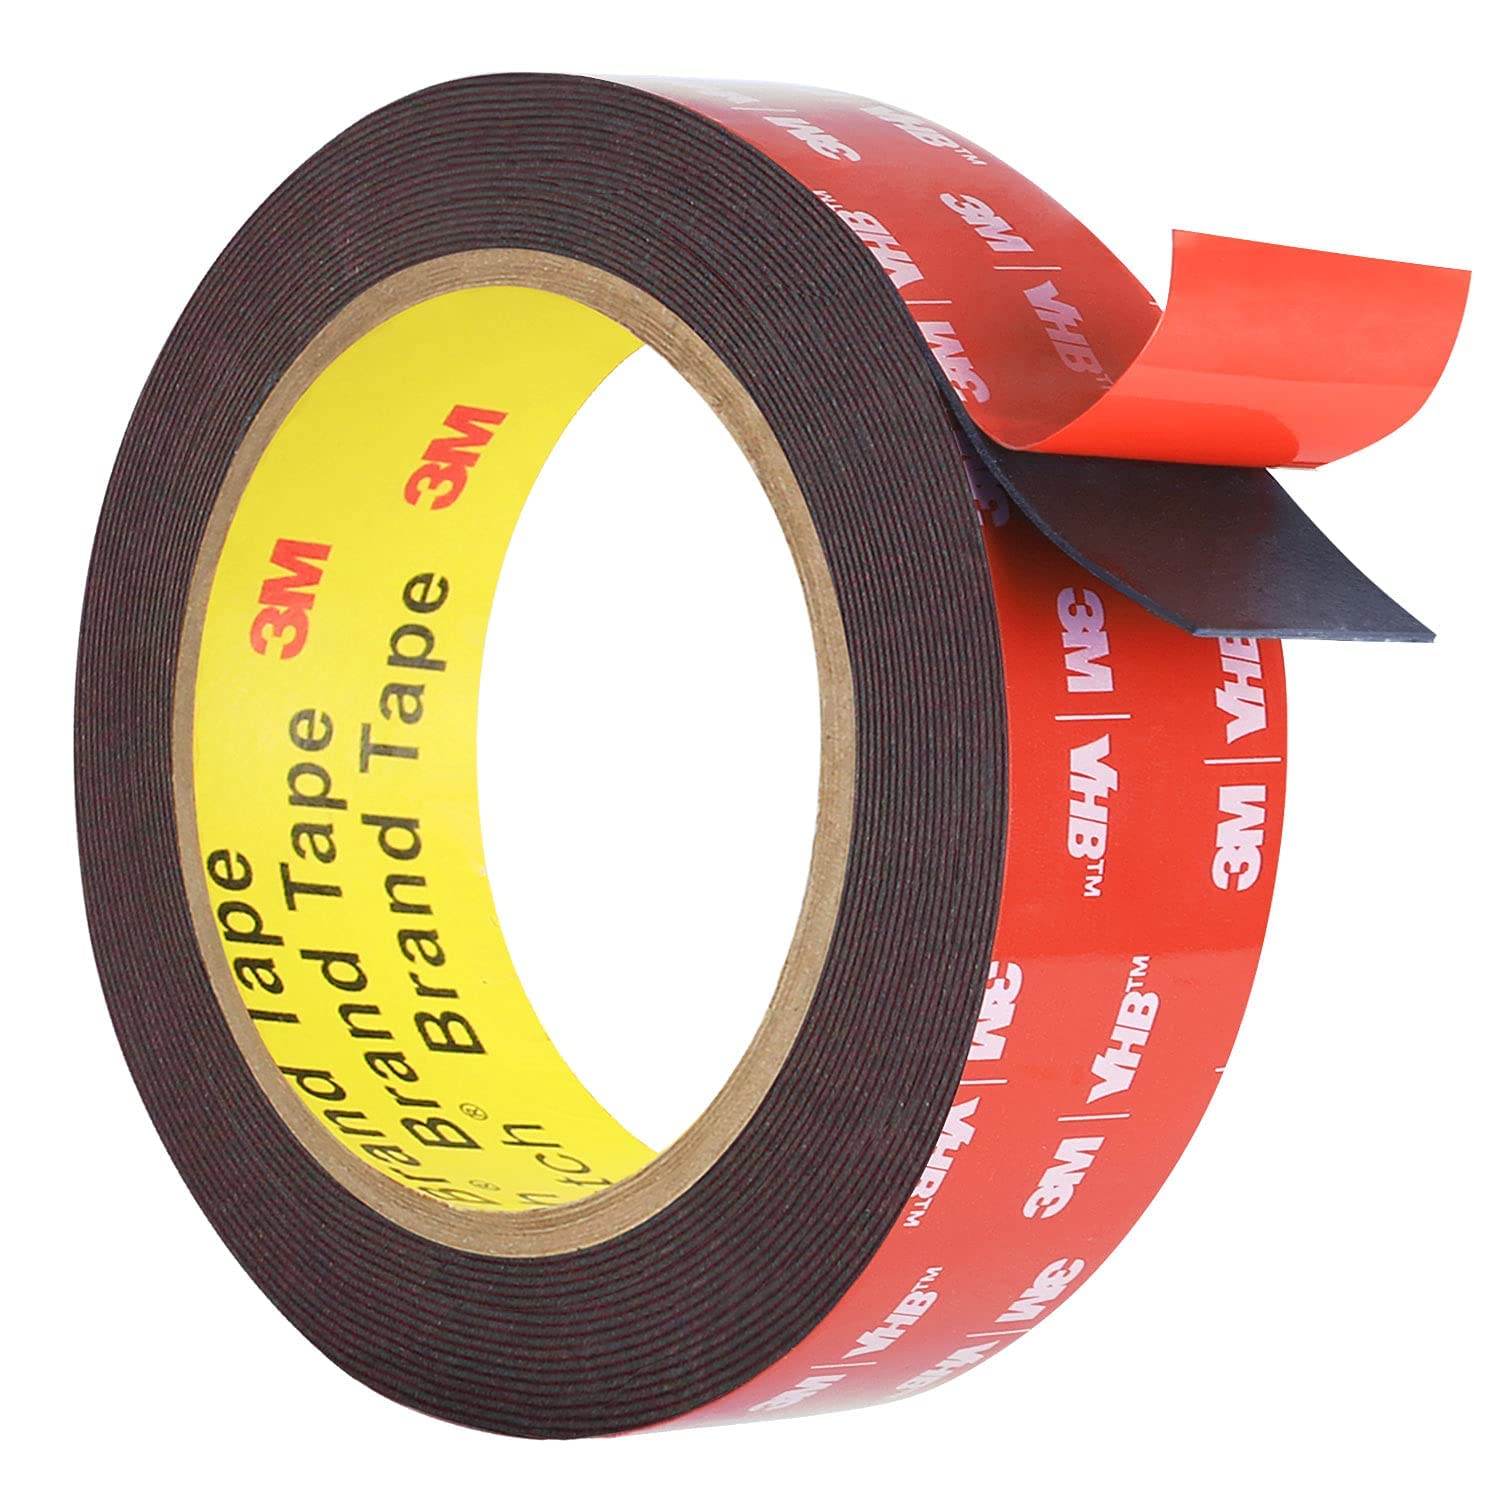 3m Double Sided Tape Mounting Tape Heavy Duty,164 Ft Length,0.4 Width